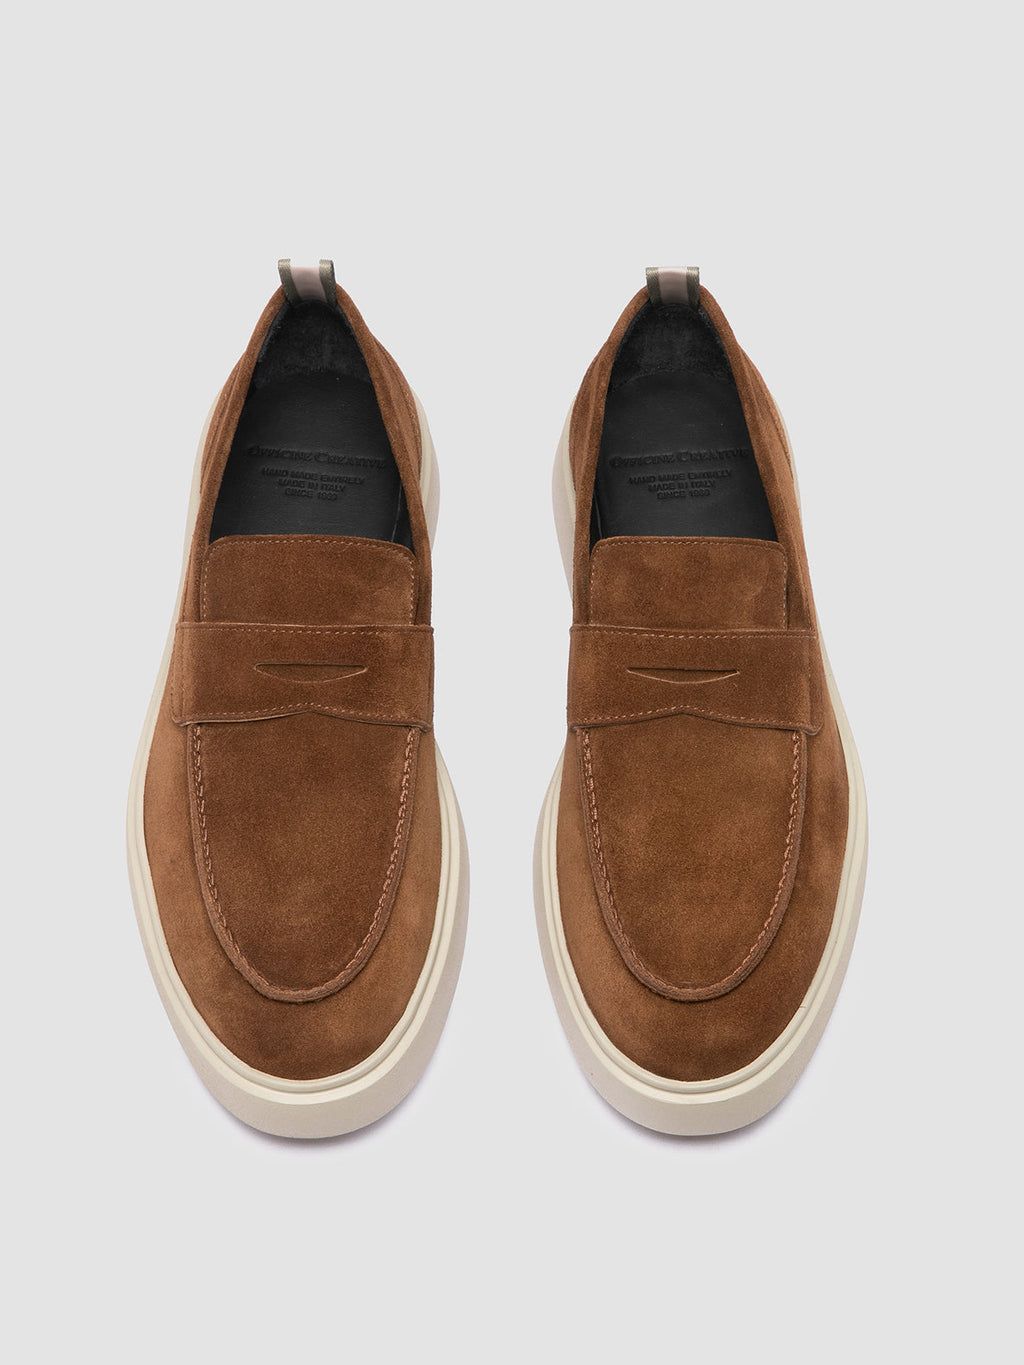 FRAME 001 - Brown Suede Penny Loafers